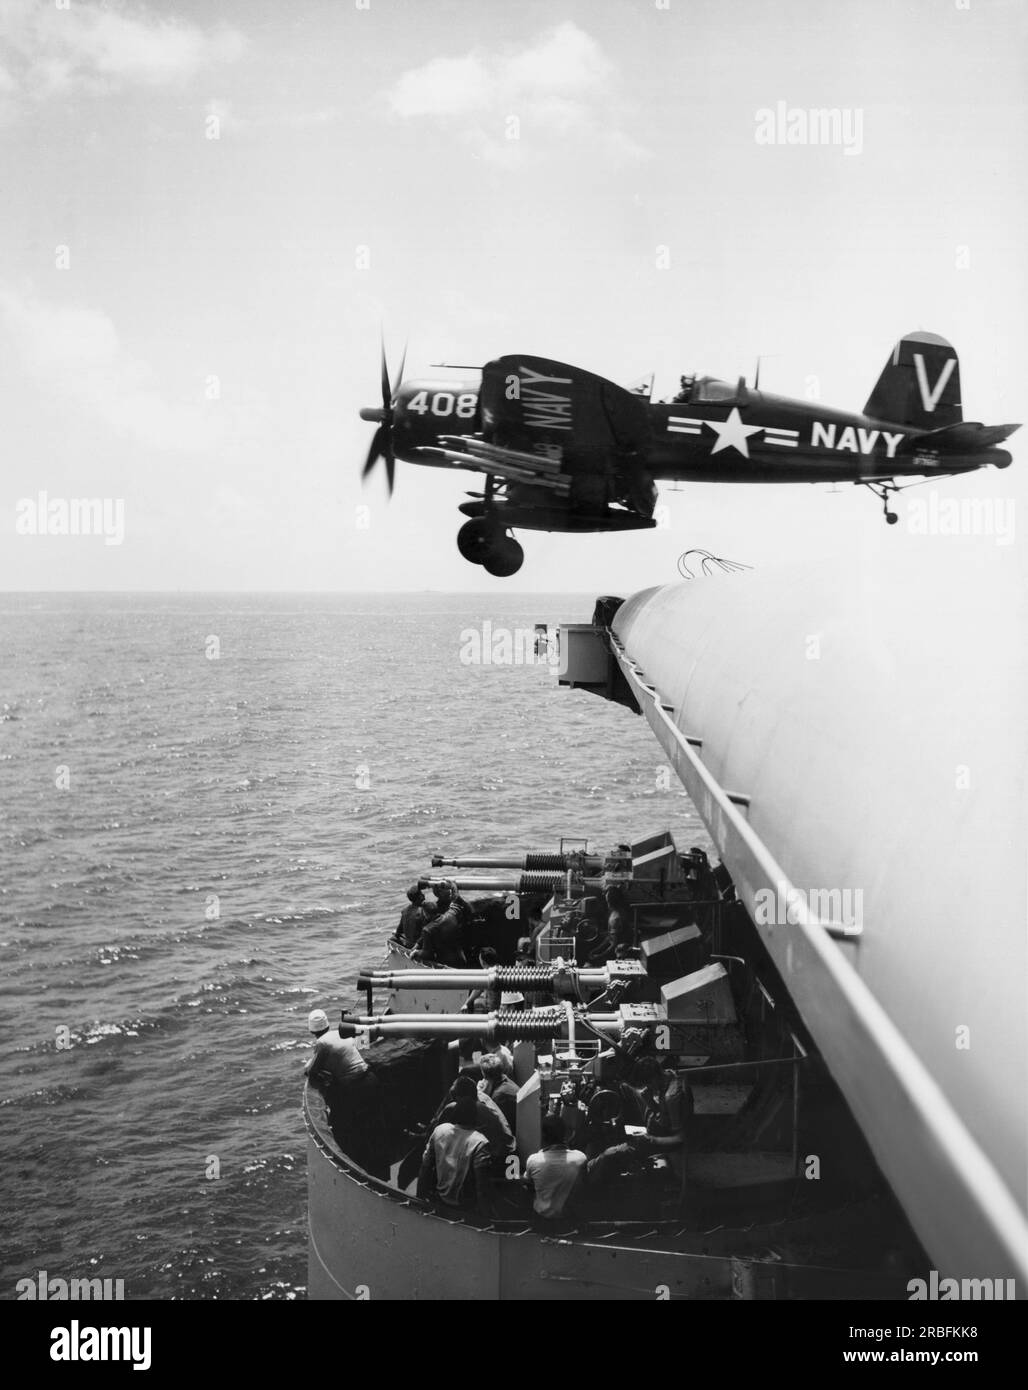 Korea:  August 4, 1950 A Navy Corsair F4U fighter leaves the flight deck of a U.S. Navy aircraft carrier for a sortie against the North Korean Communists. Stock Photo